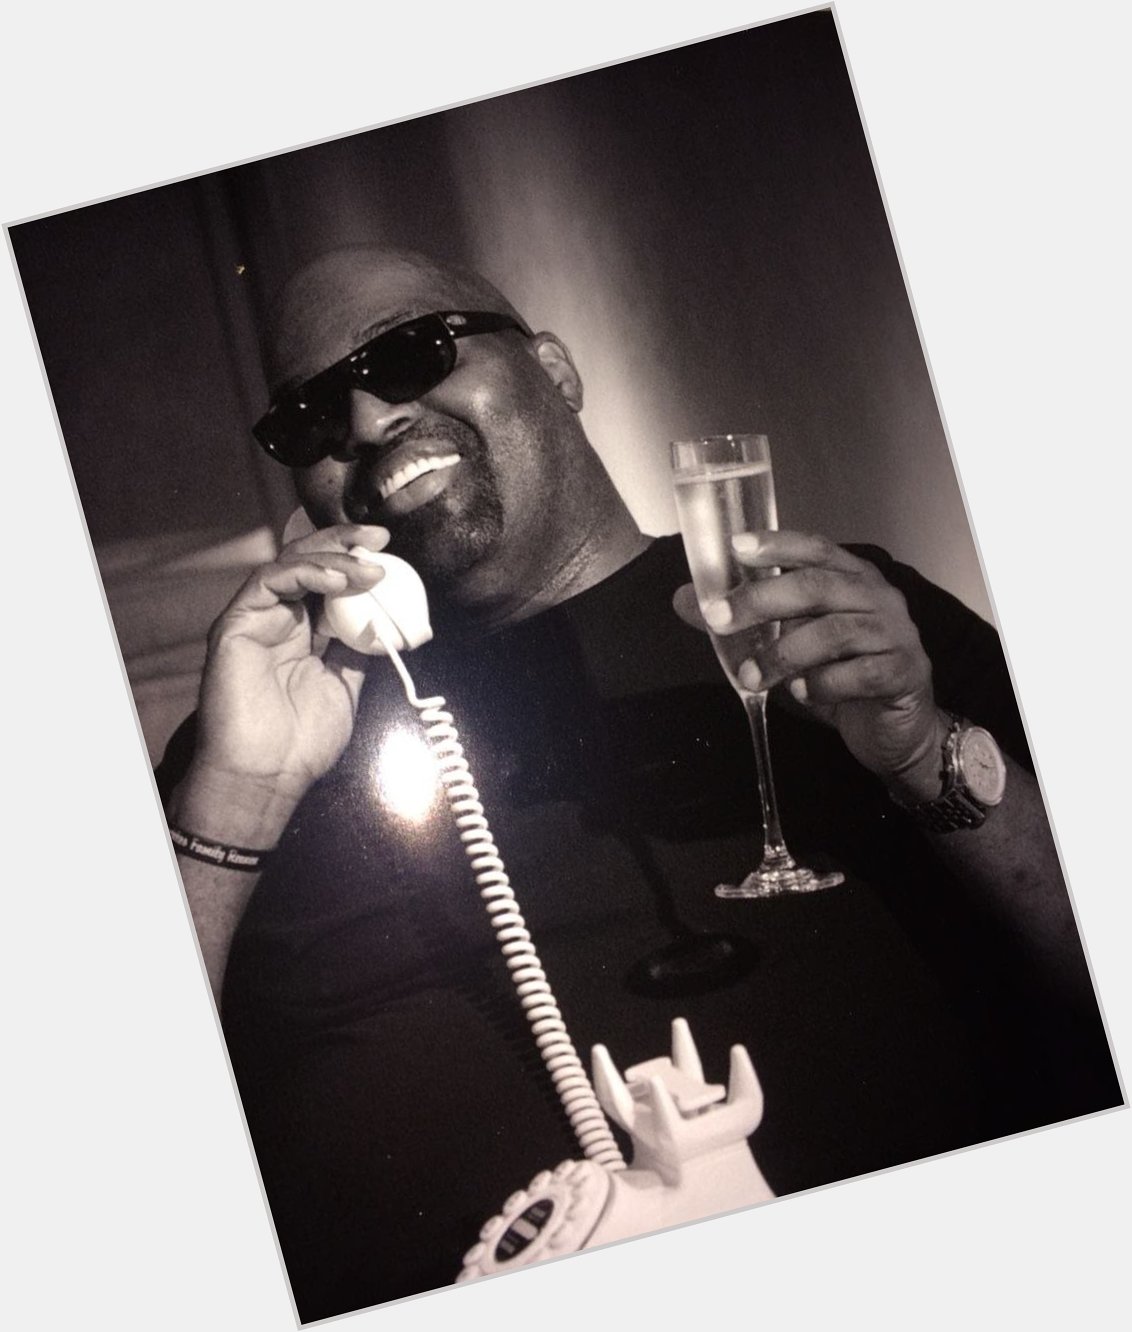 Happy Birthday to the king Frankie Knuckles! The godfather would have been 64 today. 